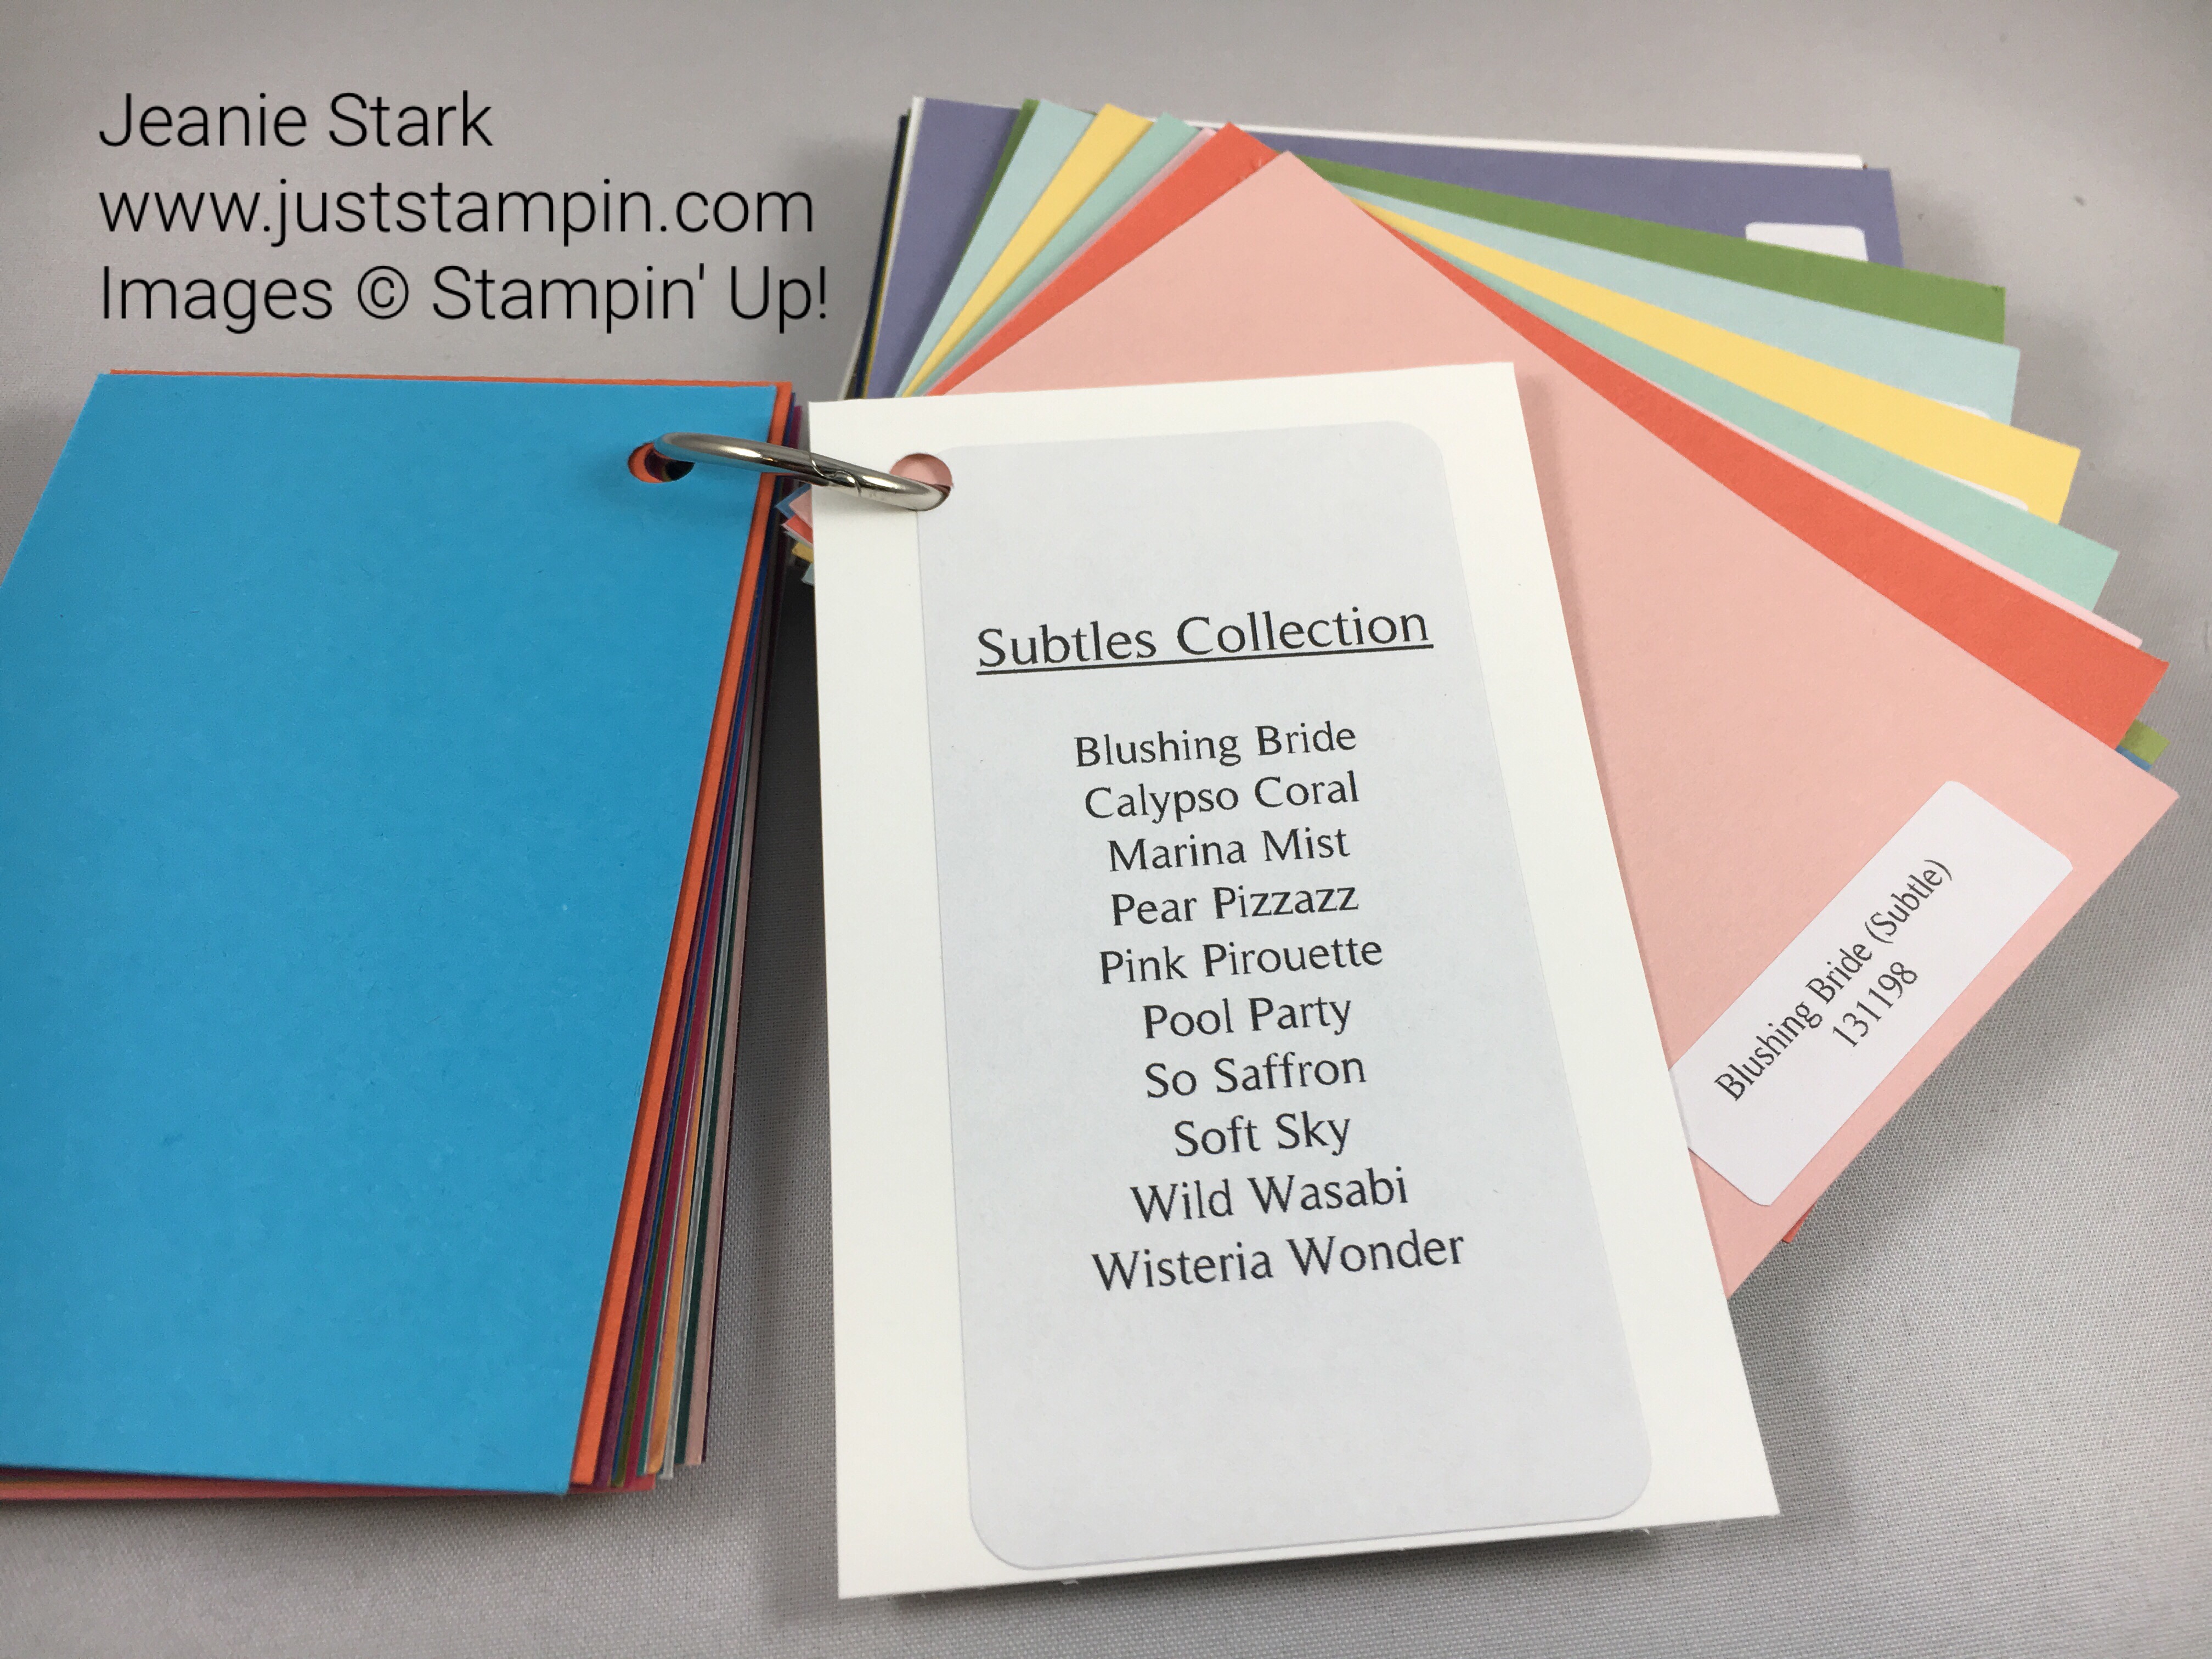 To order Stampin' Up! Color Swatch book visit www.juststampin.com. This great tool will help you with color coordination.